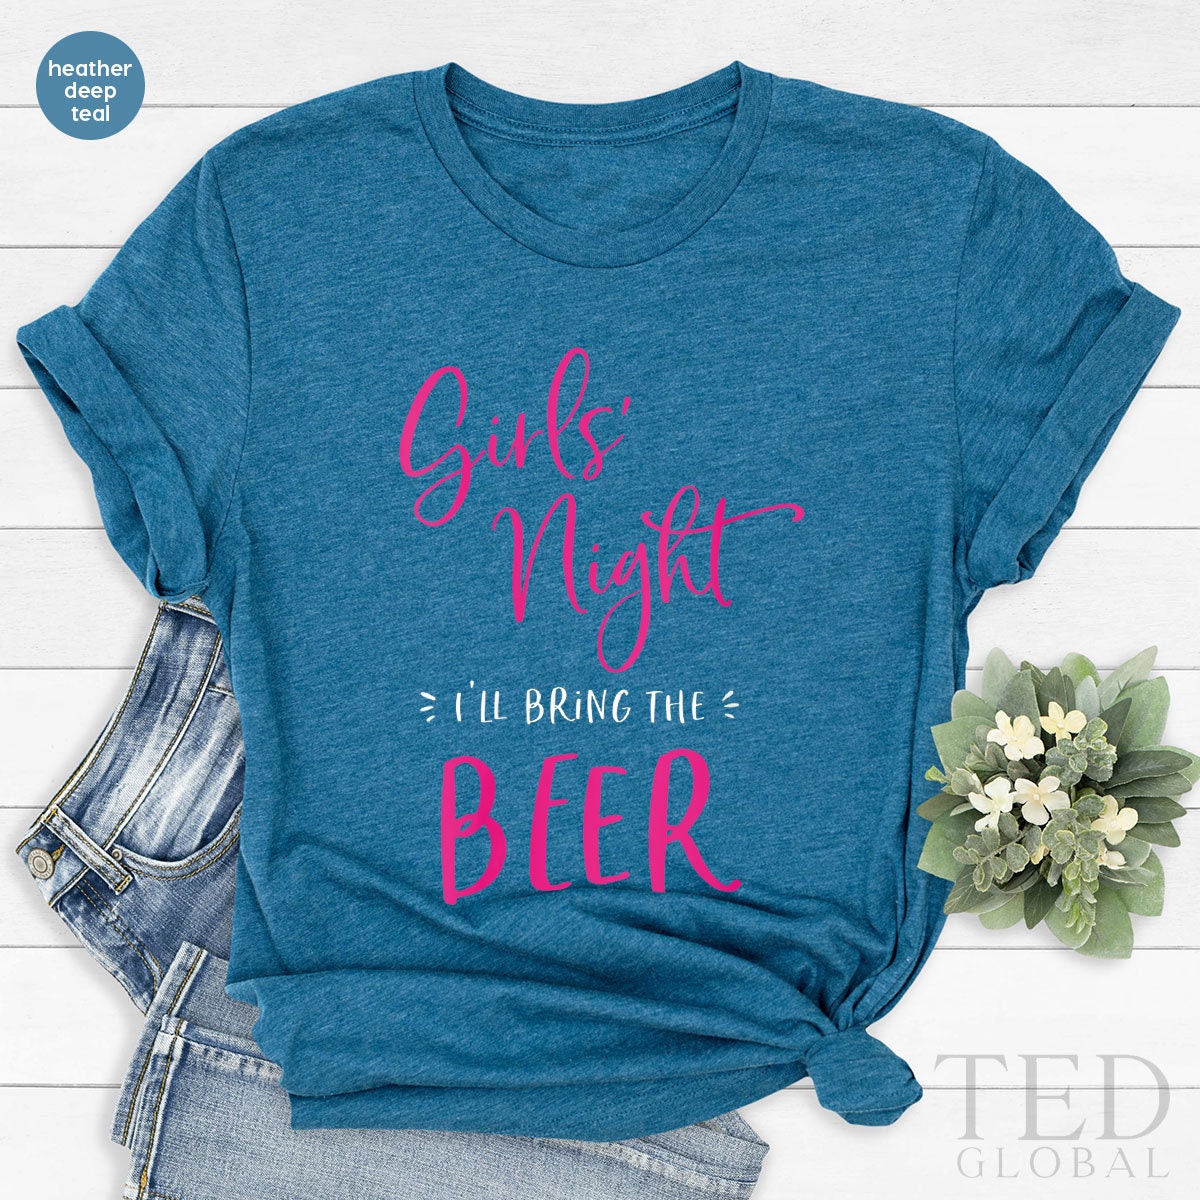 Cute Girls' Night T-Shirt, Drinking Party T Shirt, Alcoholic Girls Tee, Drinking Shirts, Beer Lover Shirt, Beer TShirt, Gift For Drinker - Fastdeliverytees.com